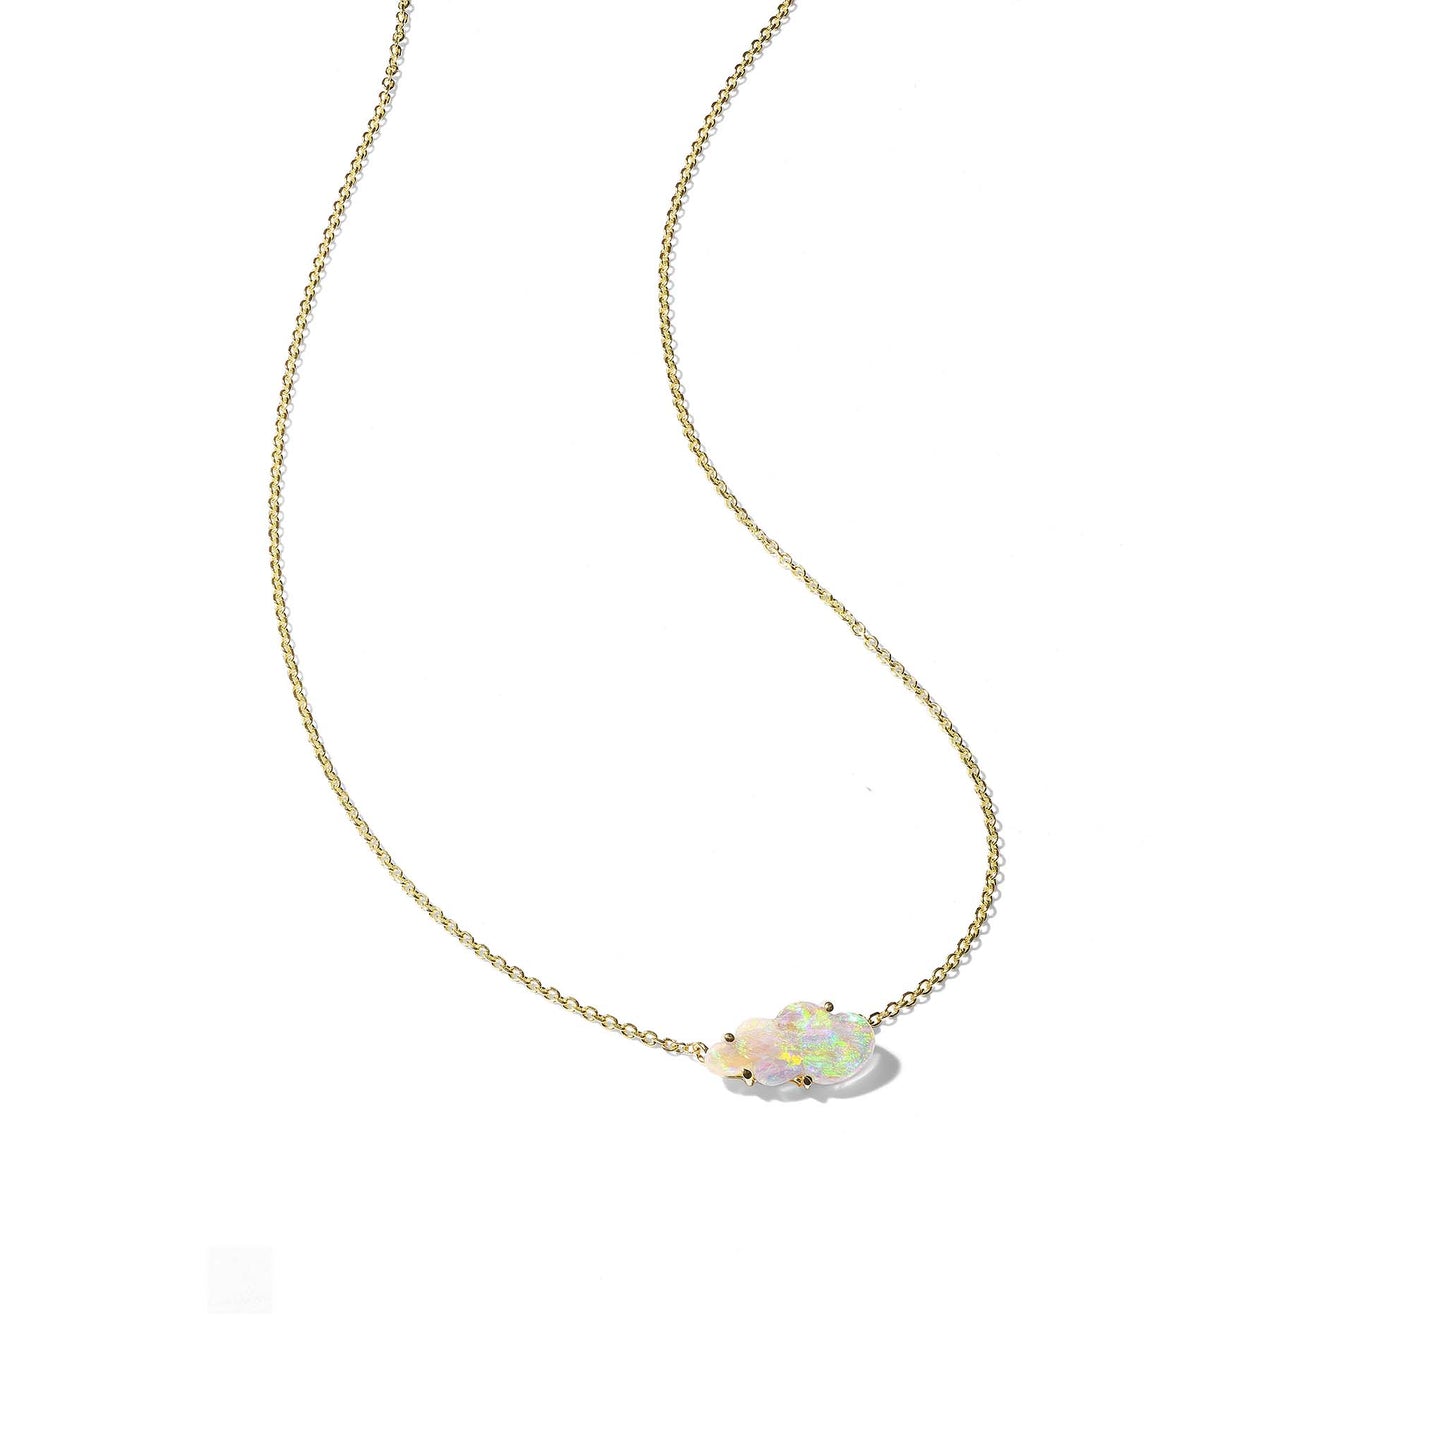 Mimi So Cloud Opal Necklace - Small 18k Yellow Gold